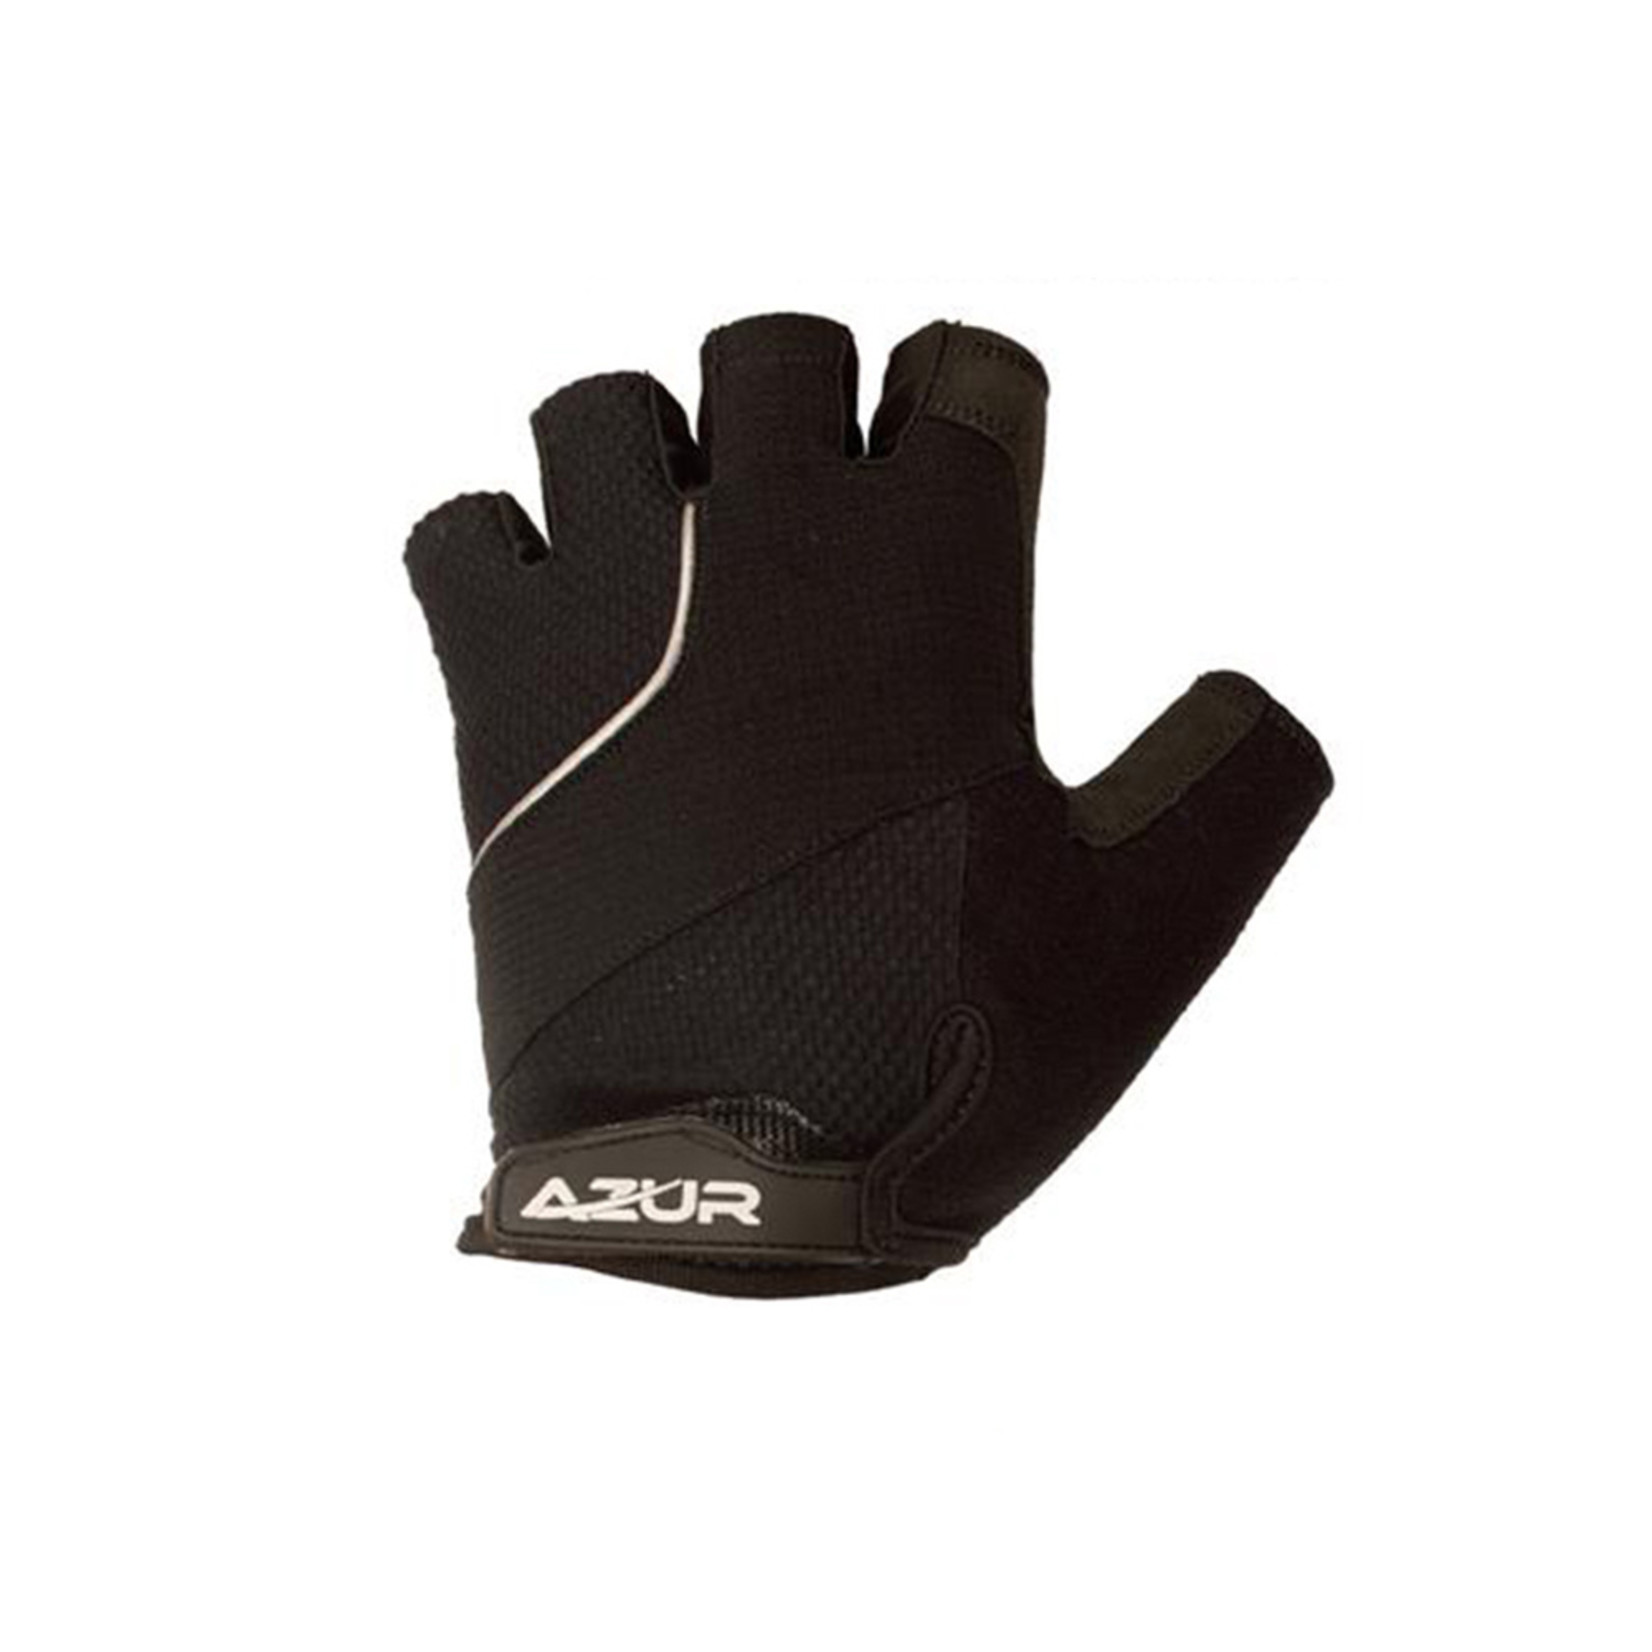 Azur Azur Bike/Cycling Glove - Synthetic Palm - S6 Series - Black - Small